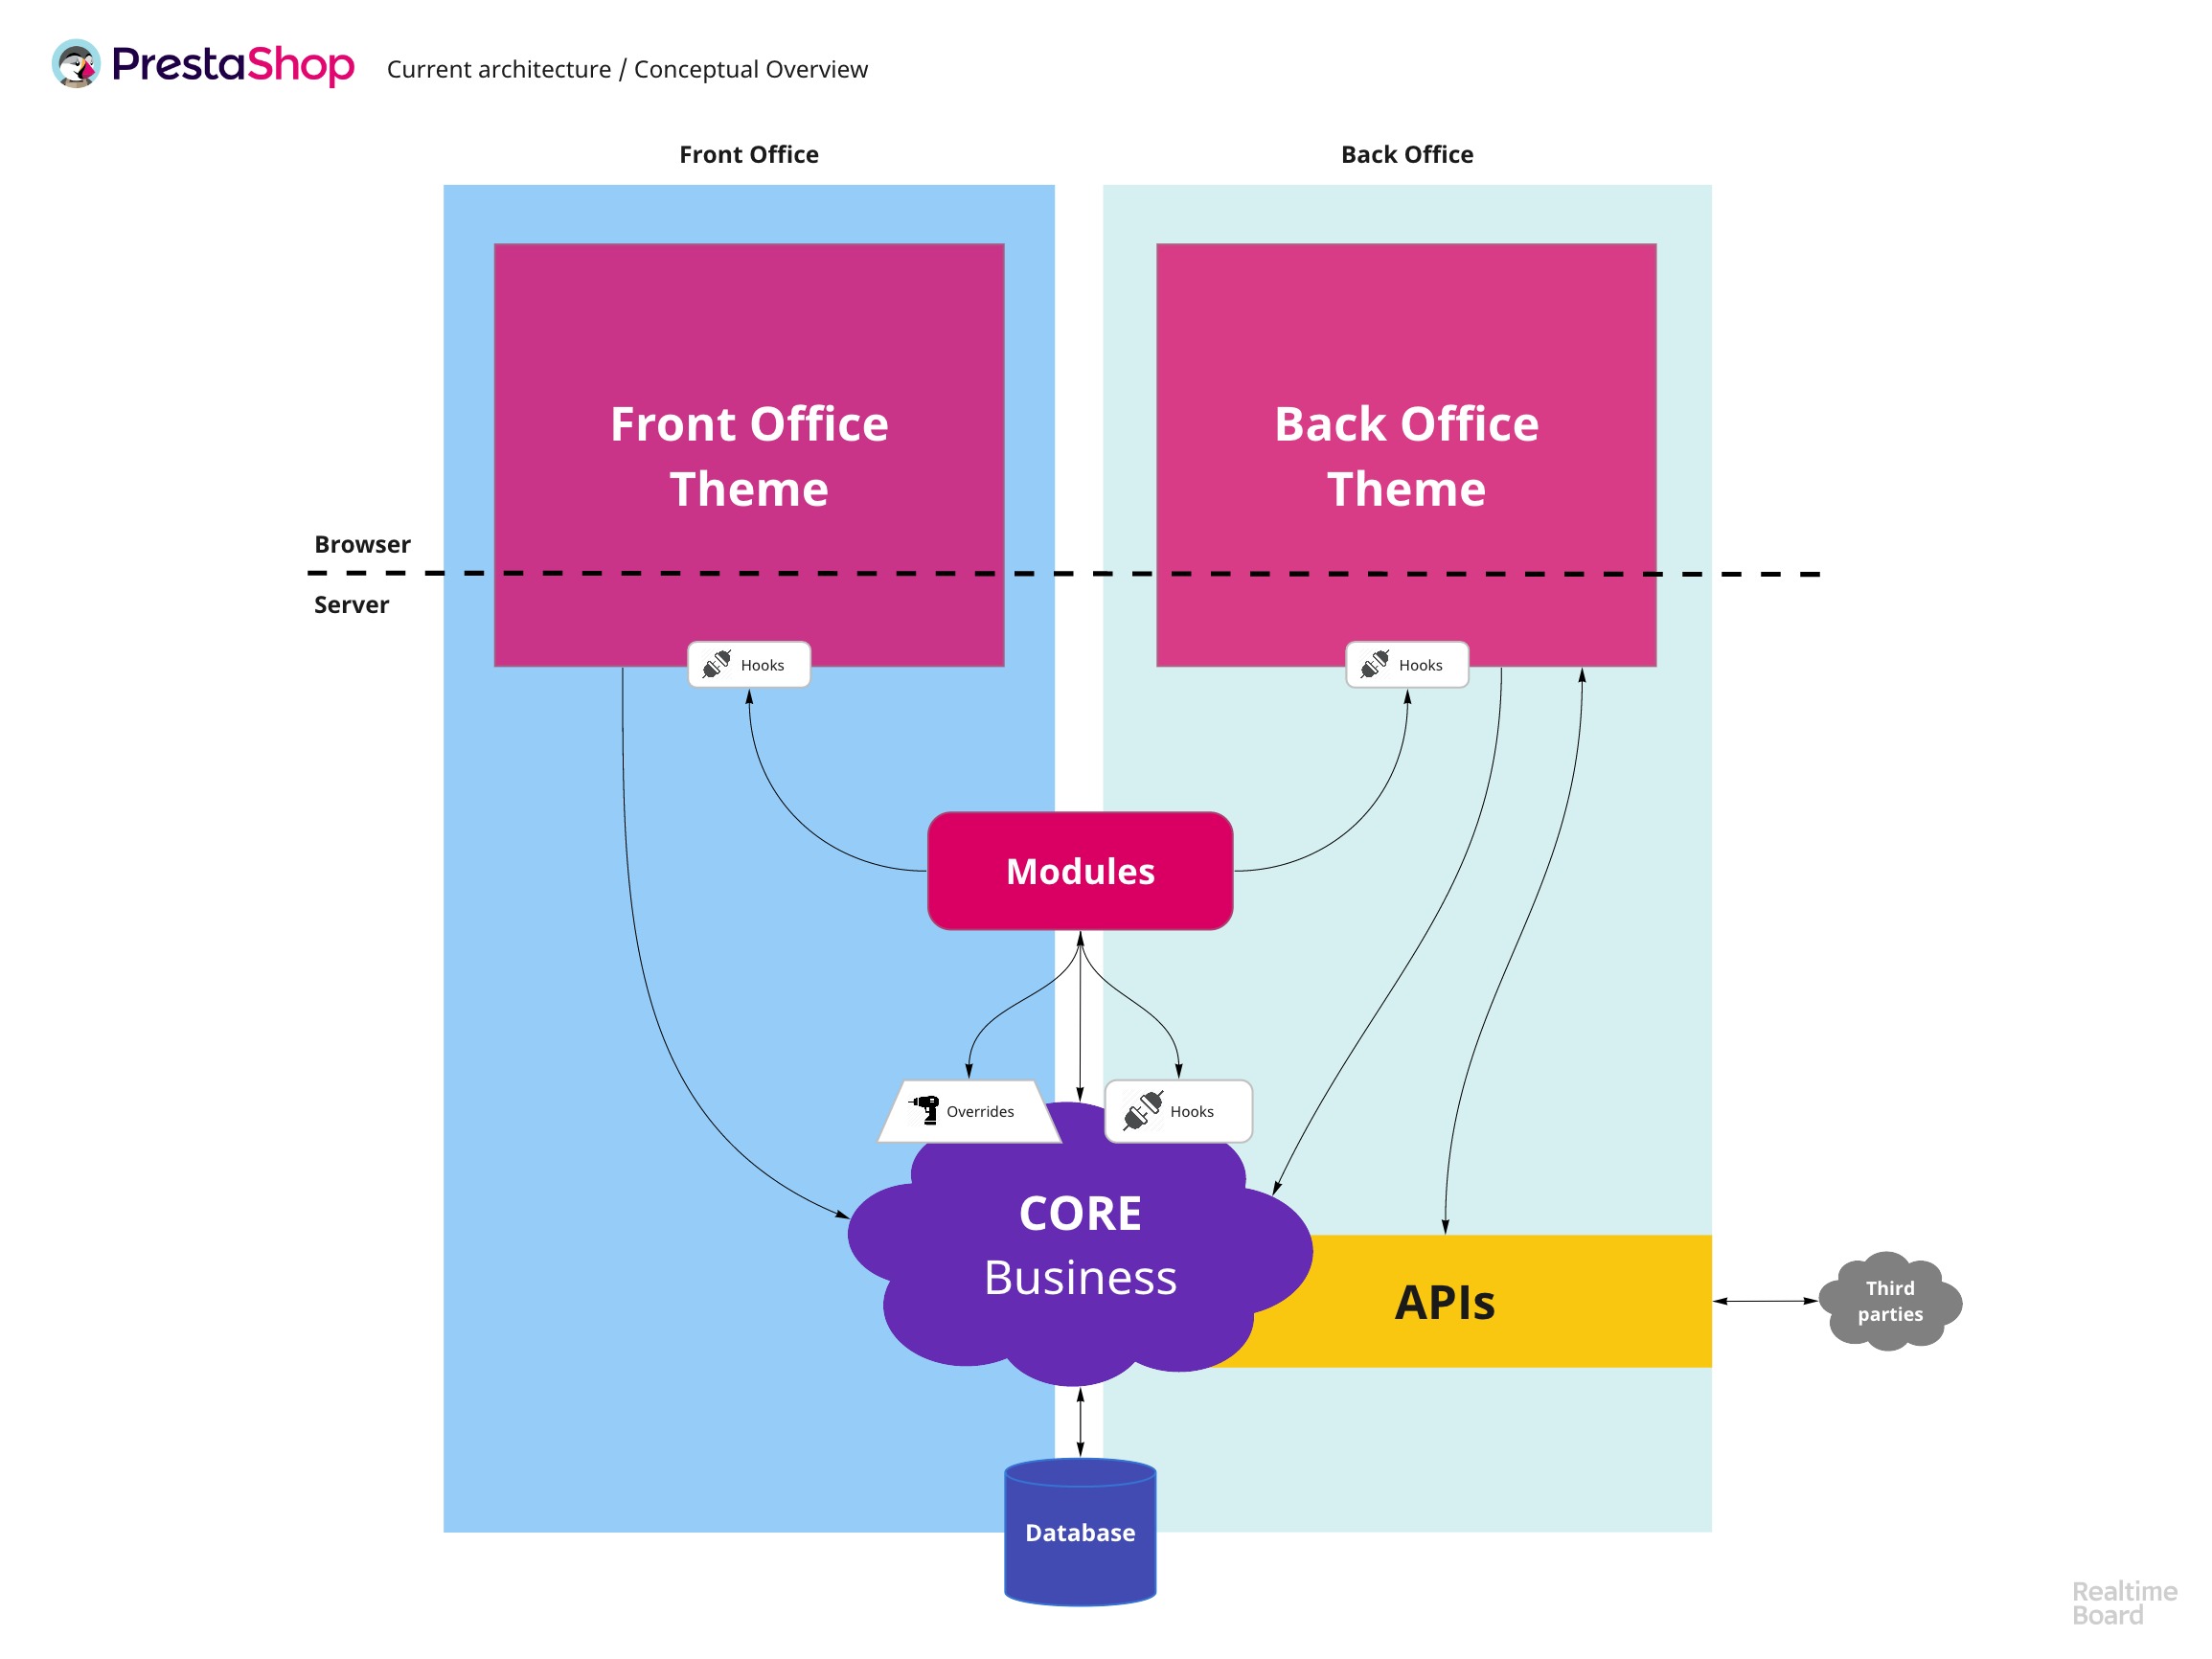 Figure 1: Basic overview of PrestaShop 1.7's architecture, early 2019